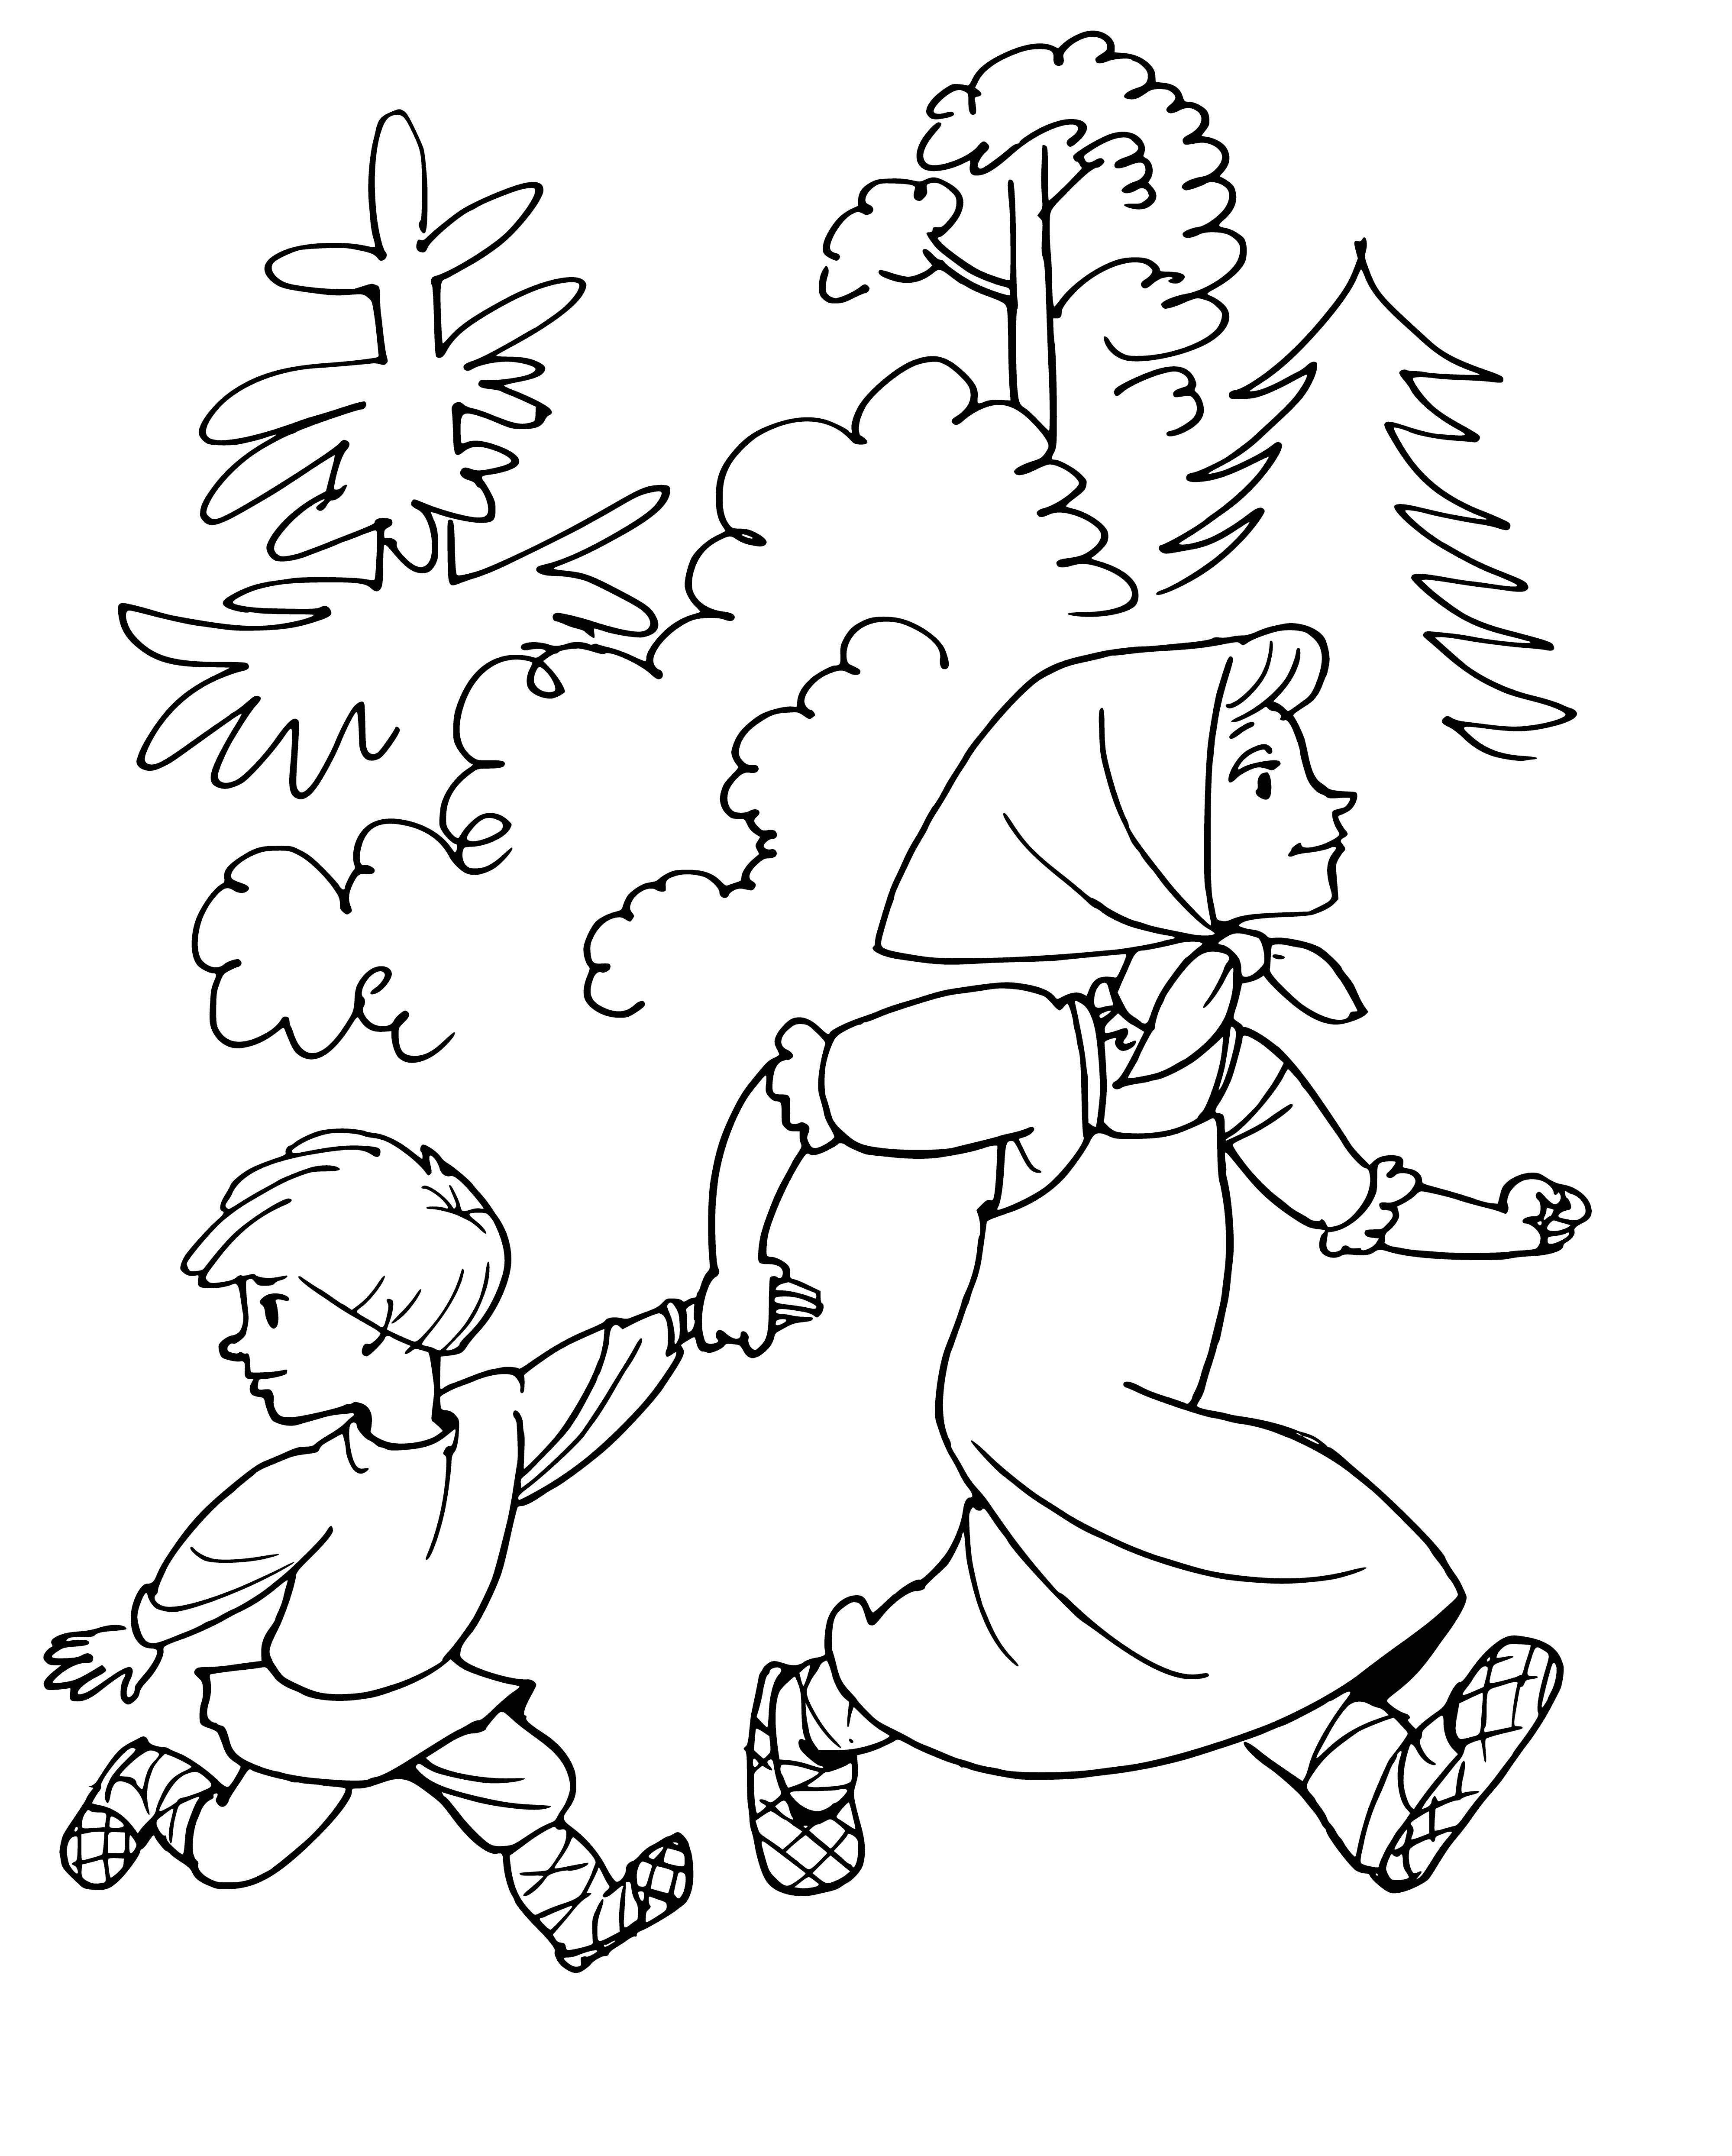 coloring page: Young boy weak on ground; sister looks concerned, holds water bowl, about to pour on brother.